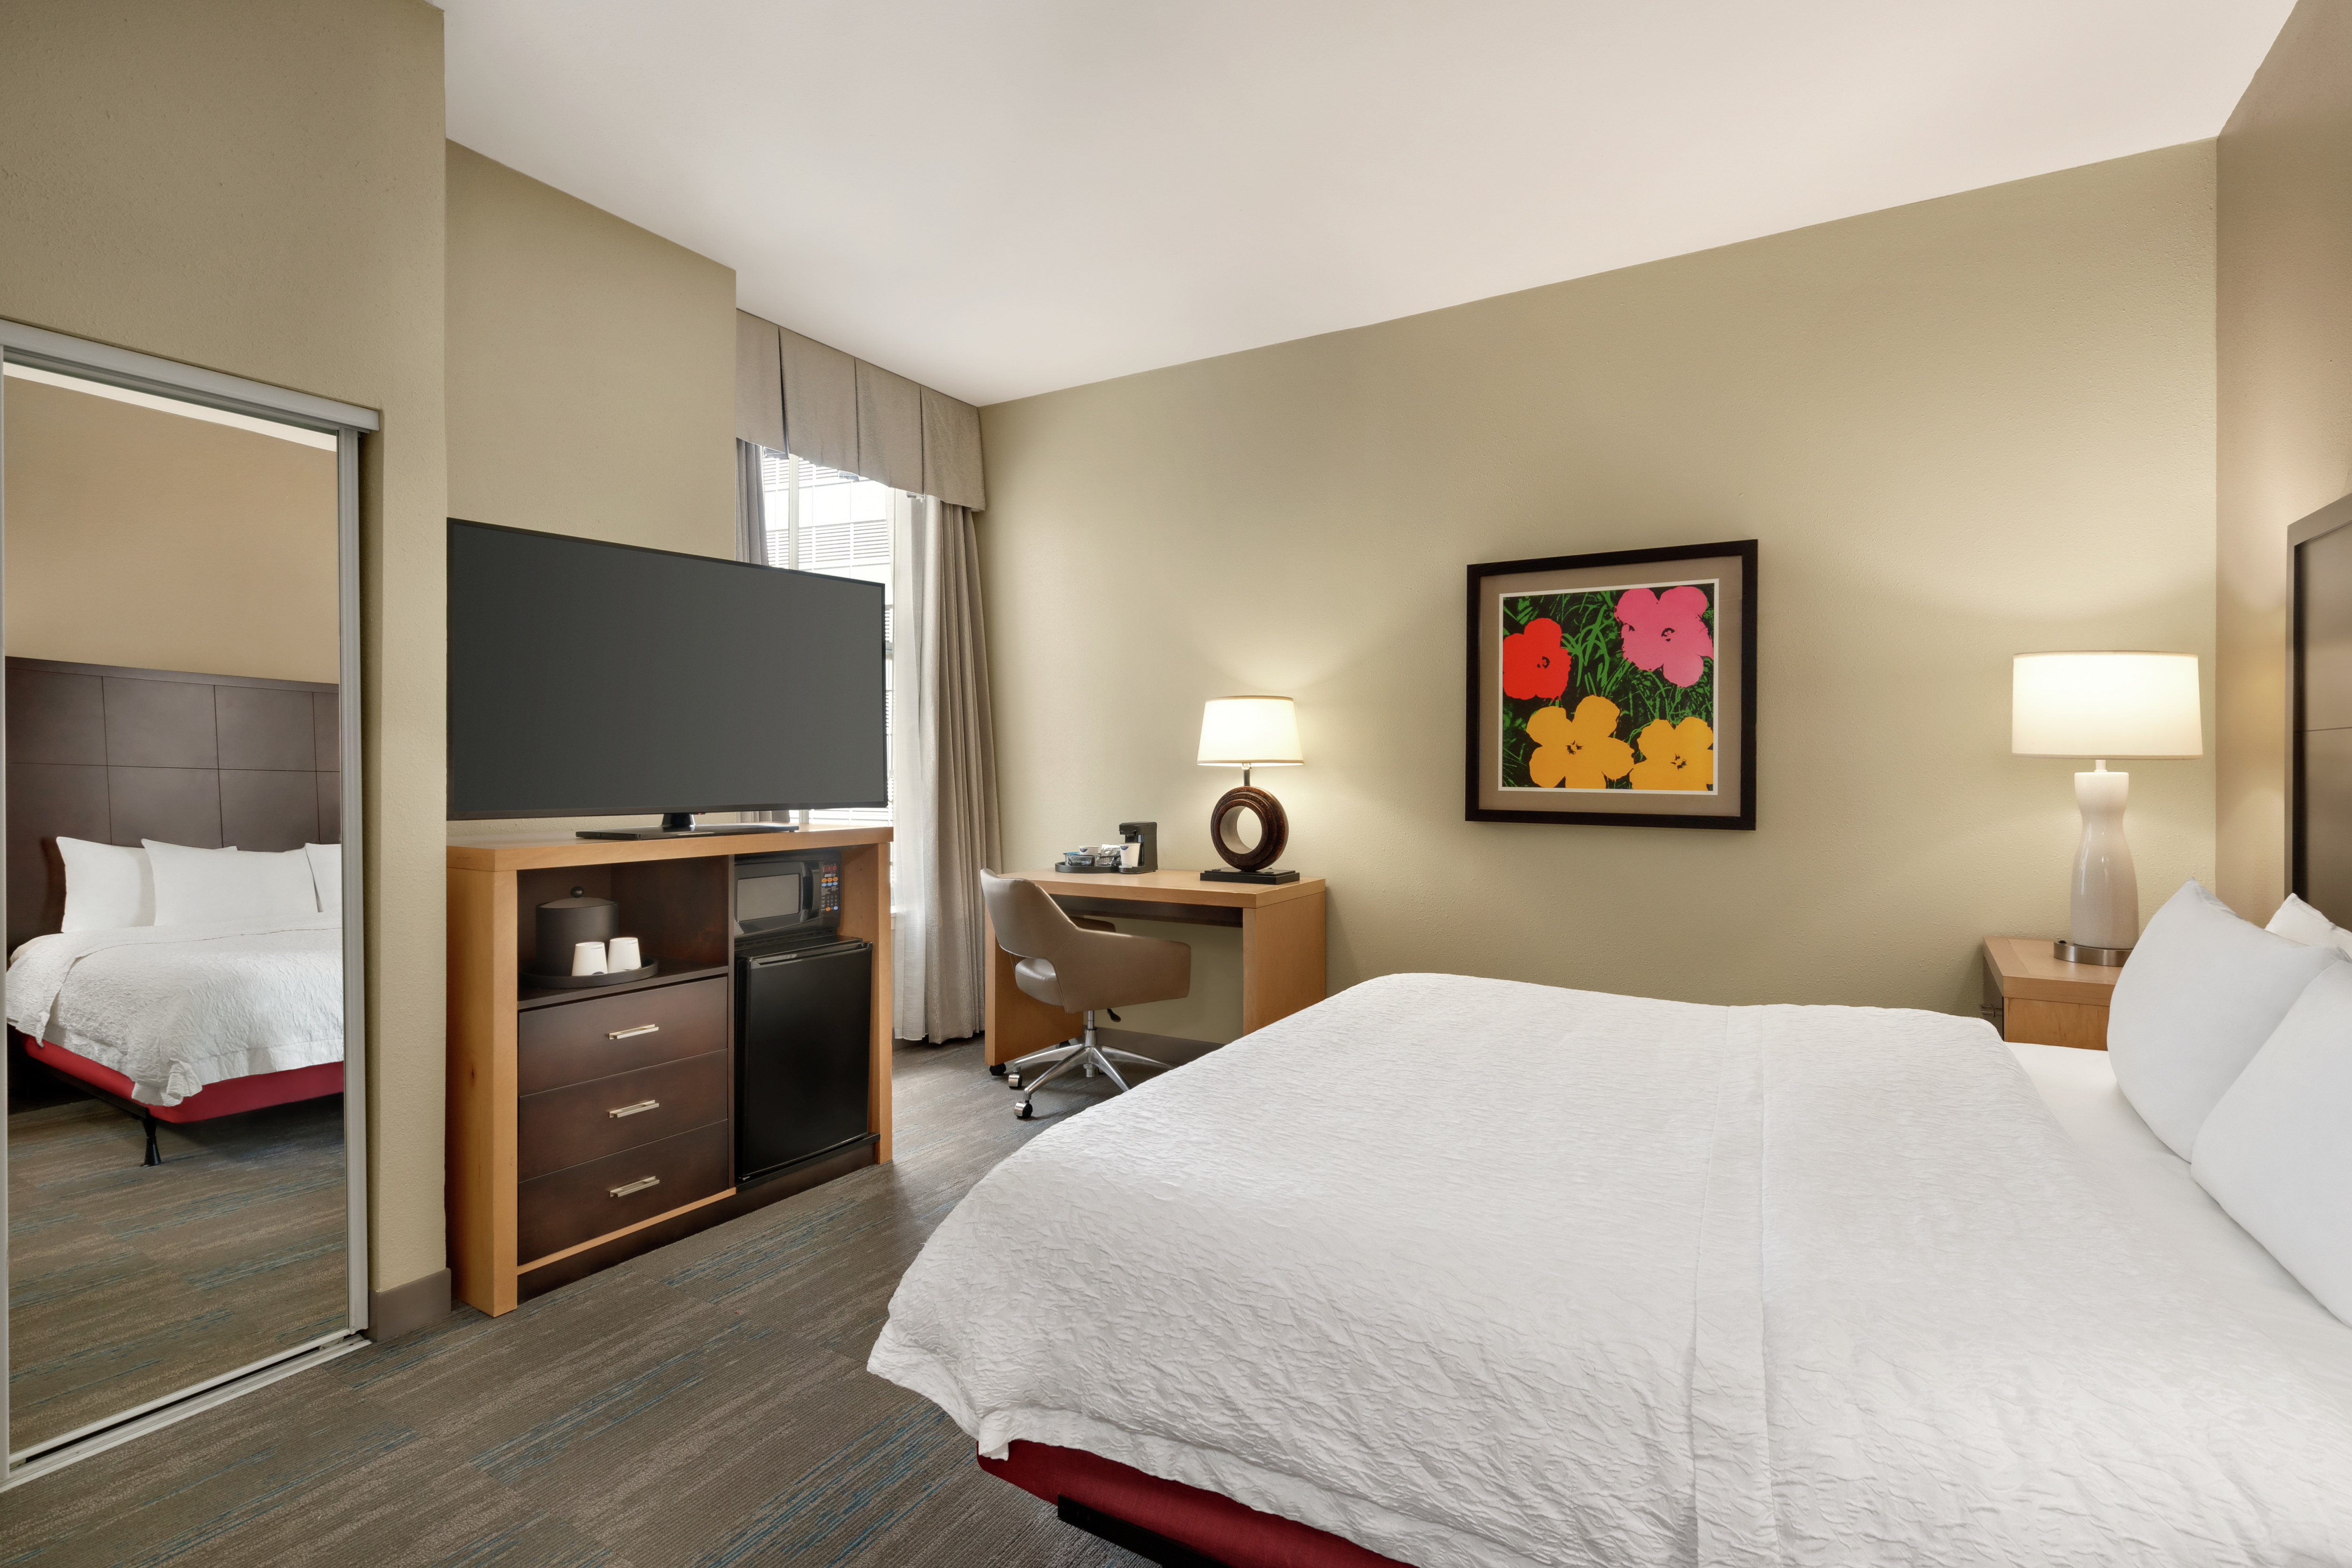 Spacious accessible guestroom featuring comfortable king bed, work desk, and TV.